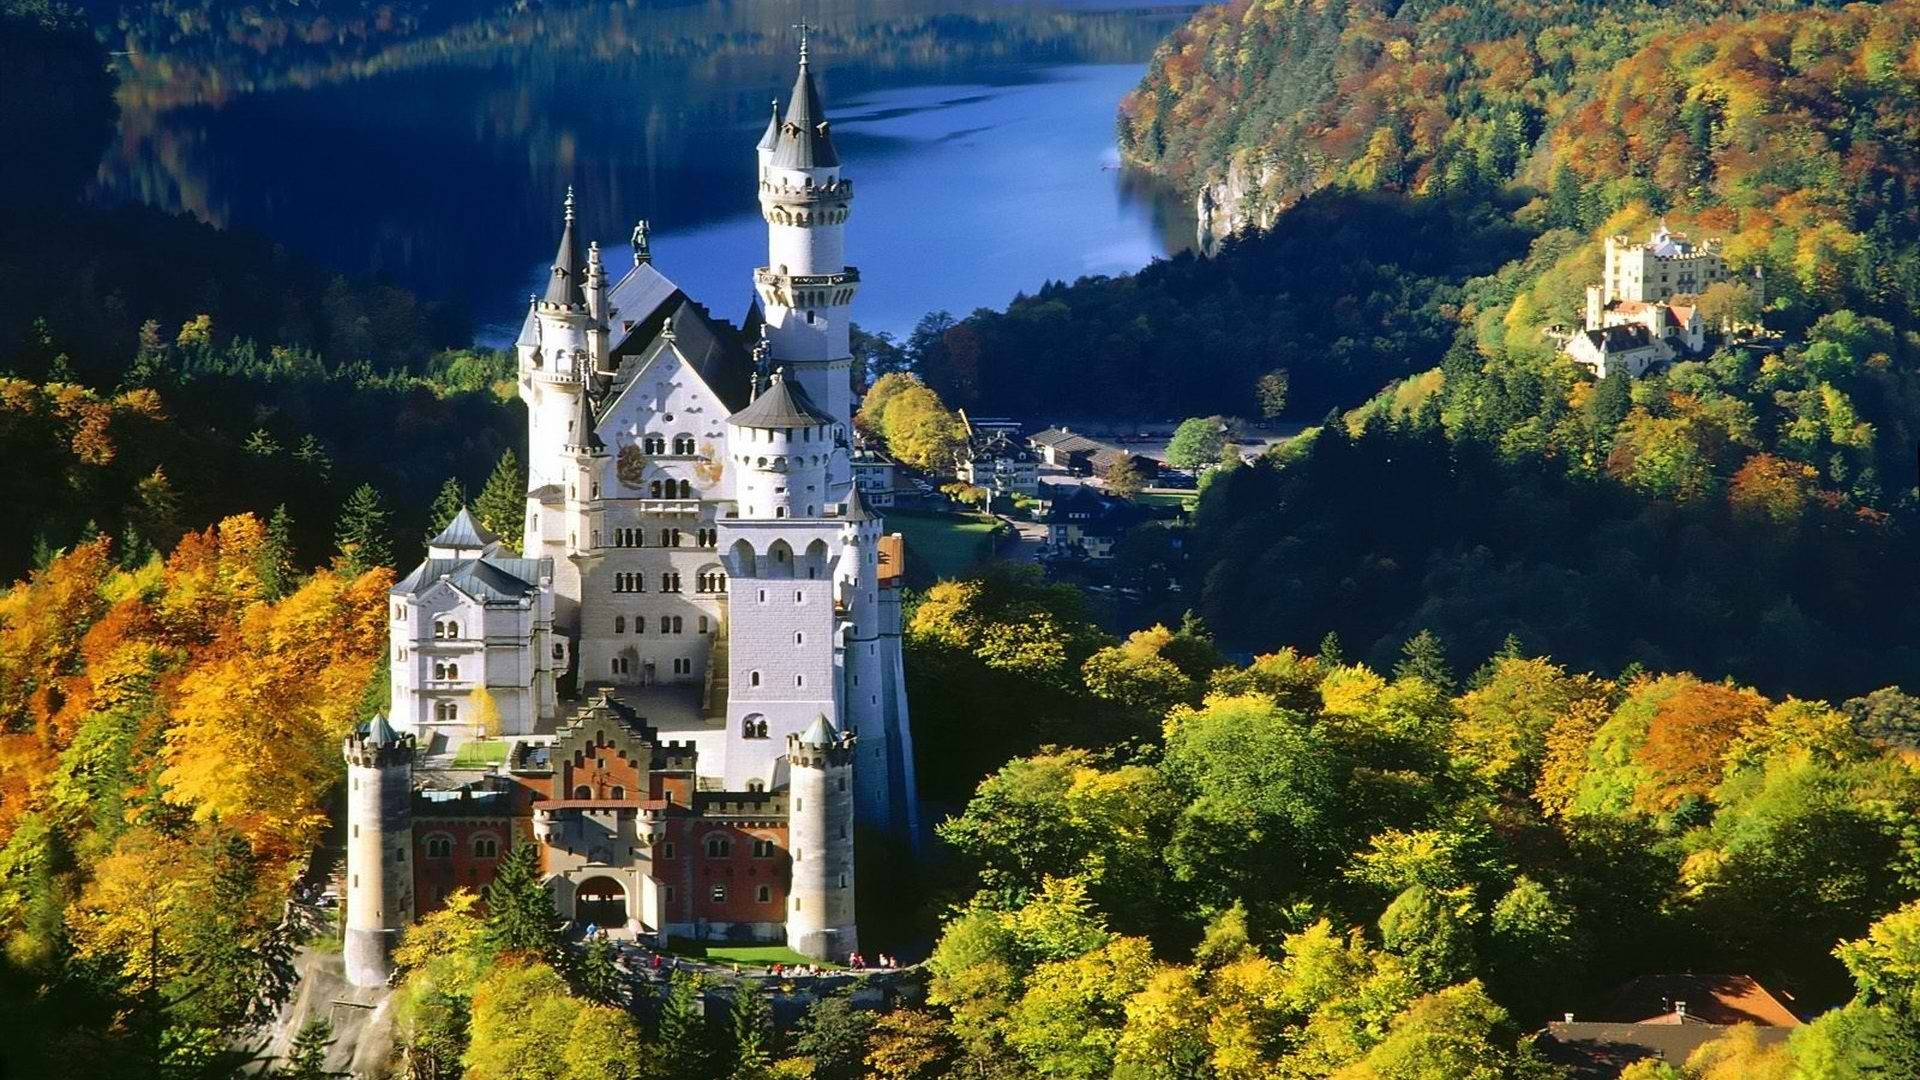  wallpapers category of free hd wallpapers neuschwanstein castle